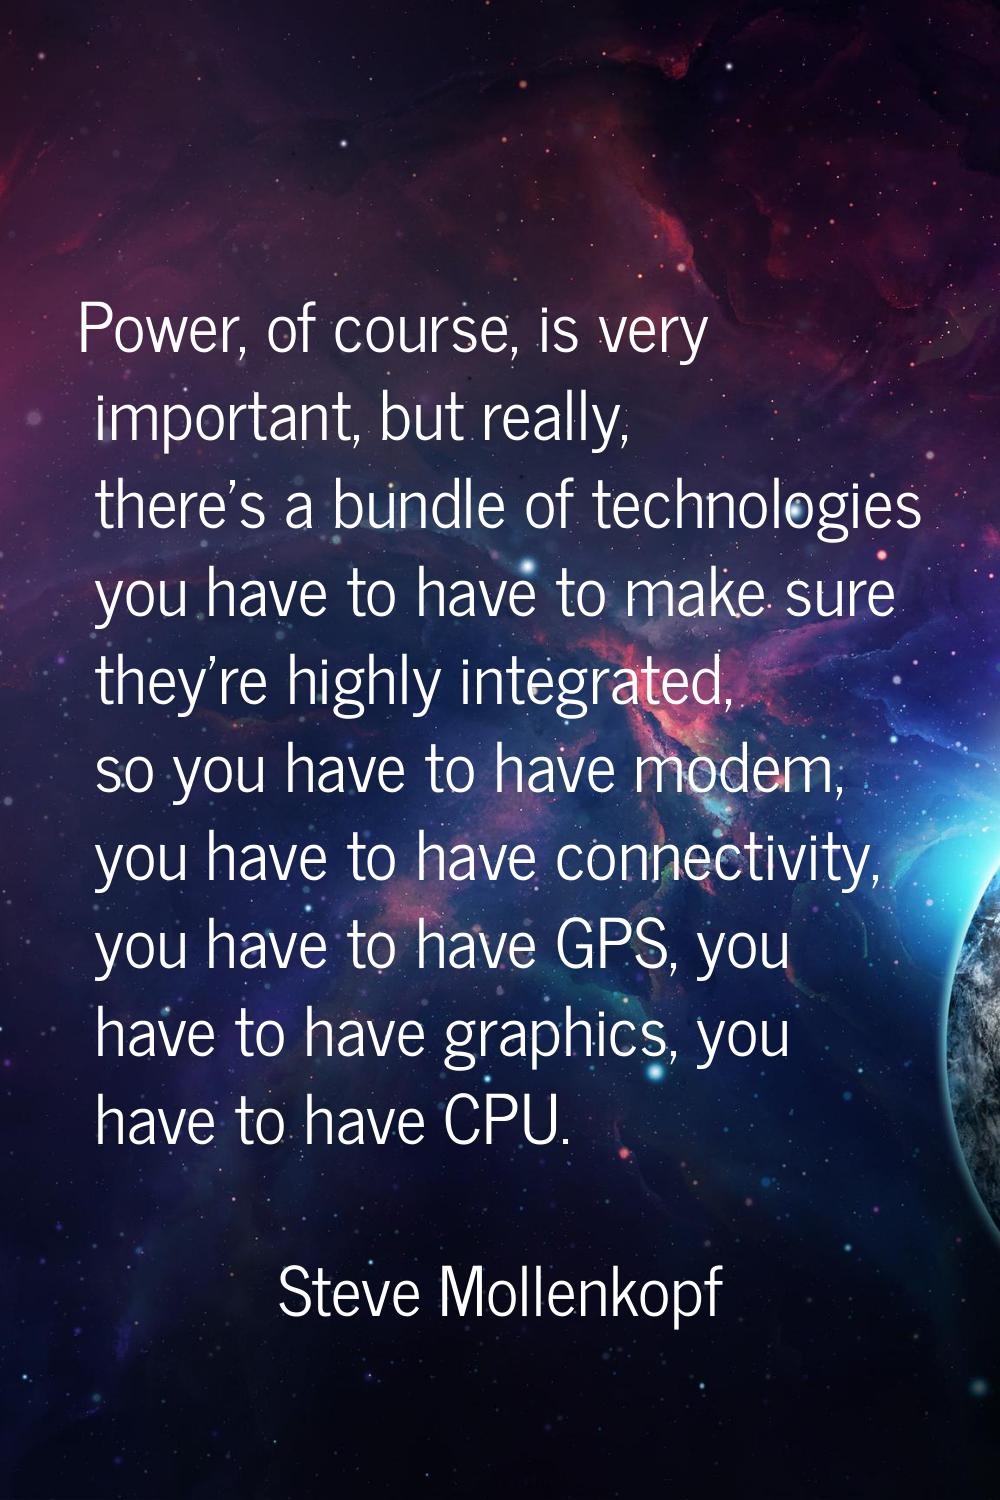 Power, of course, is very important, but really, there's a bundle of technologies you have to have 